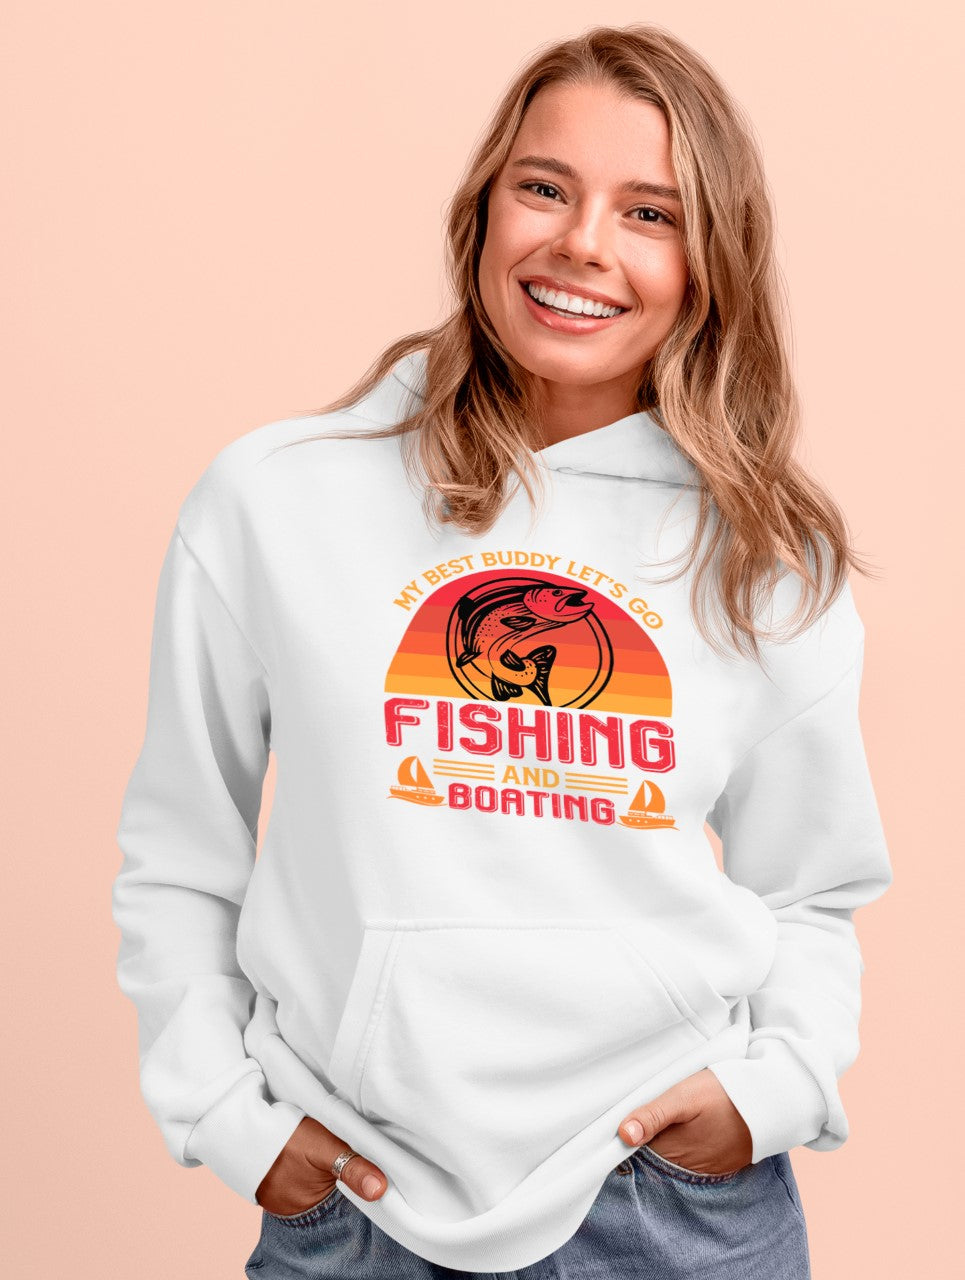 My Best Buddy Fishing And Boating - Hoodie